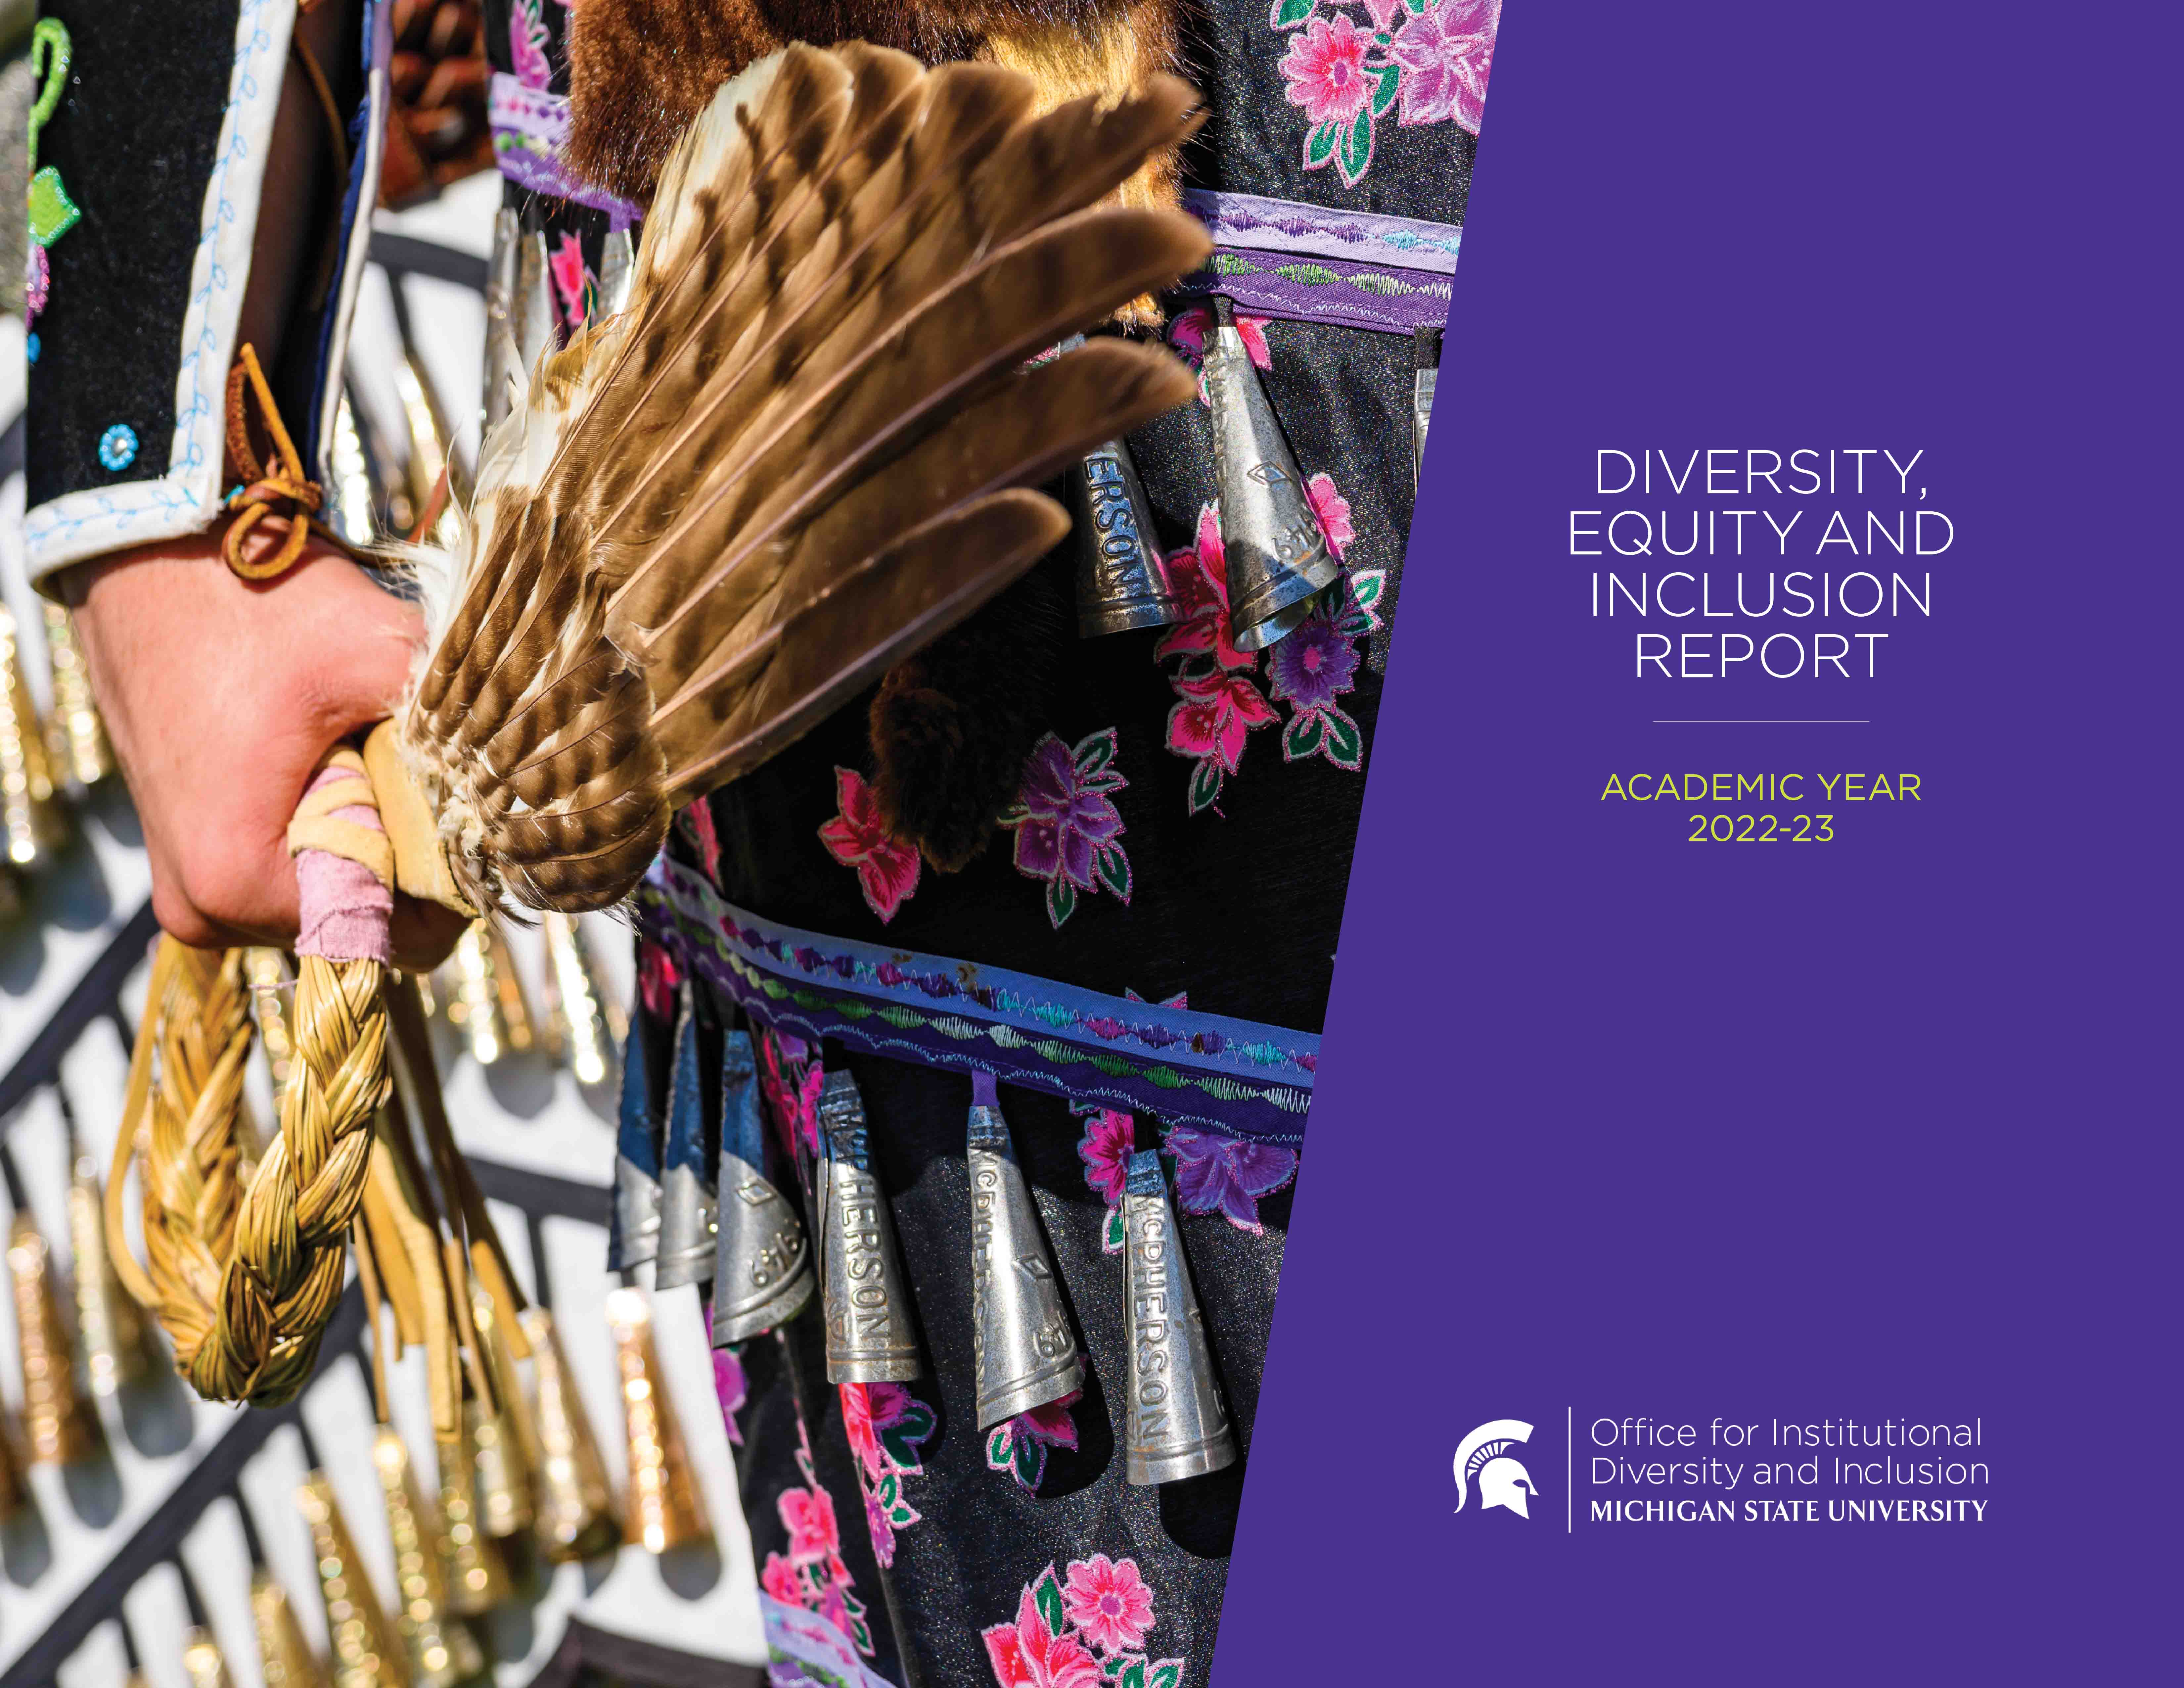 Cover page of the 2022-23 annual Diversity, Equity and Inclusion Report